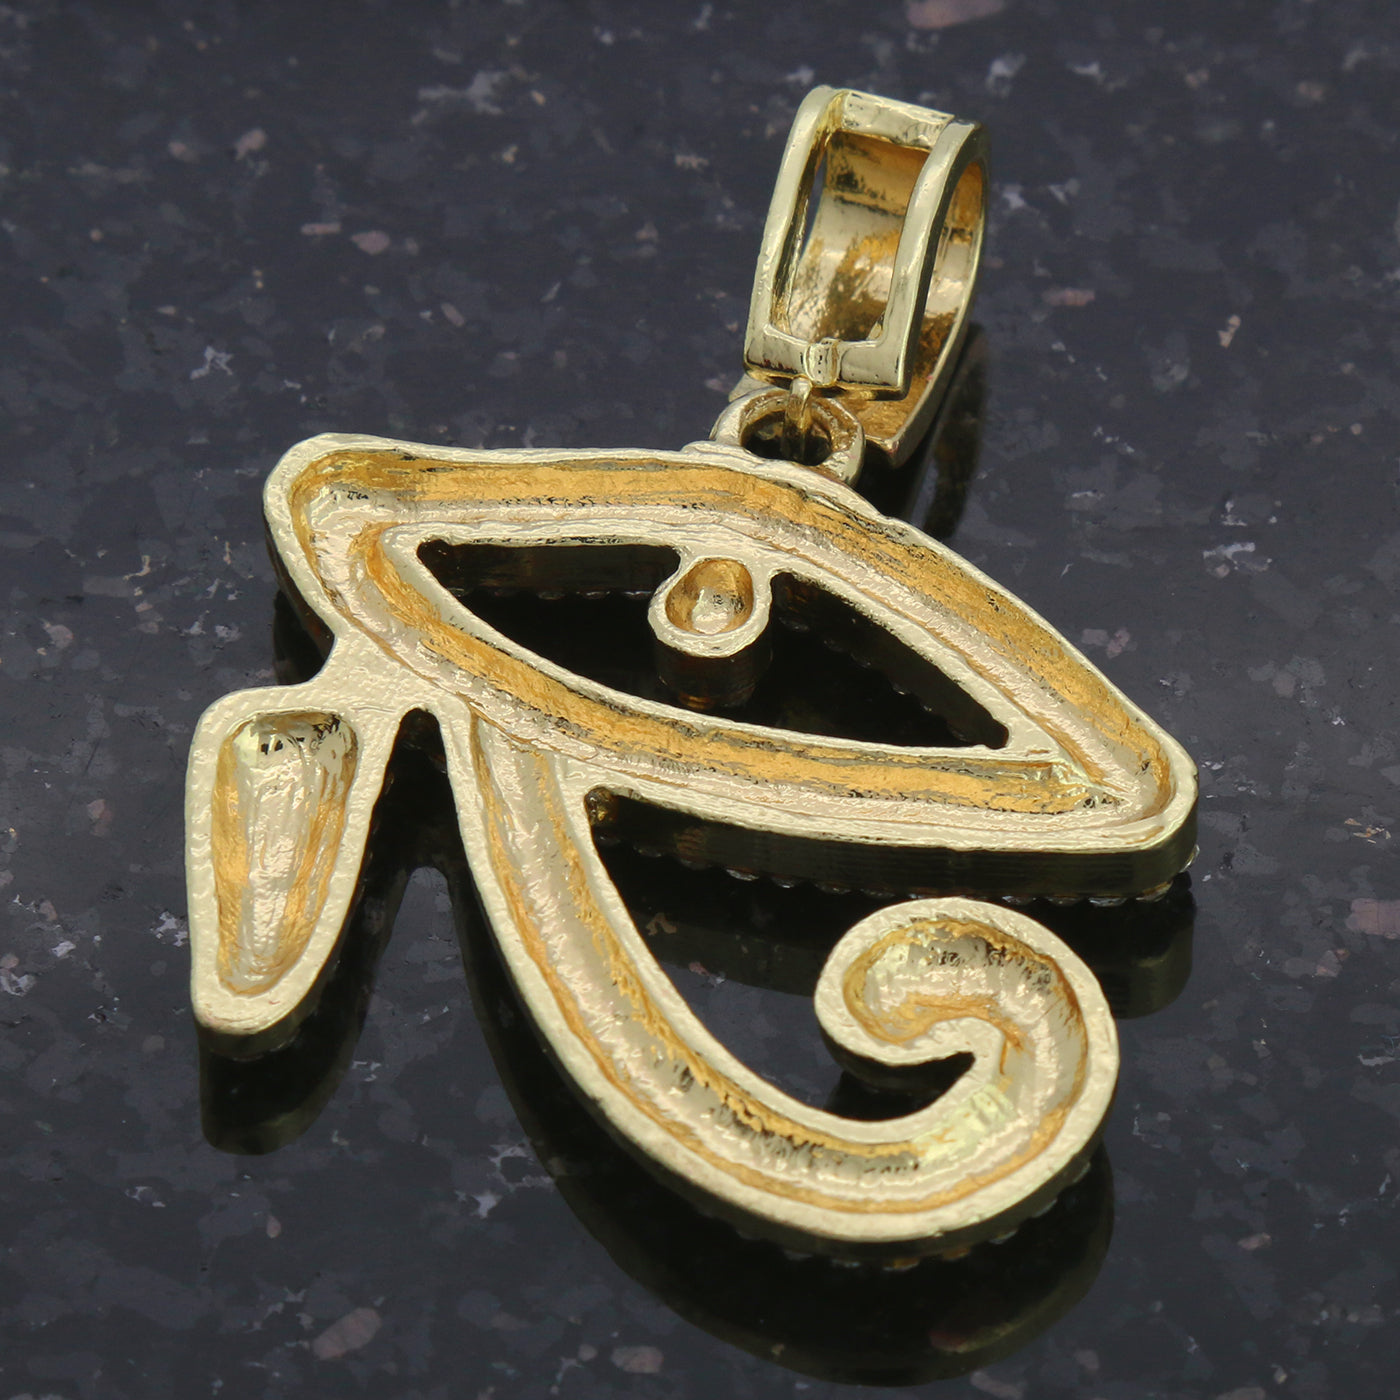 Eye Horus Pendant with Gold Rope Chain